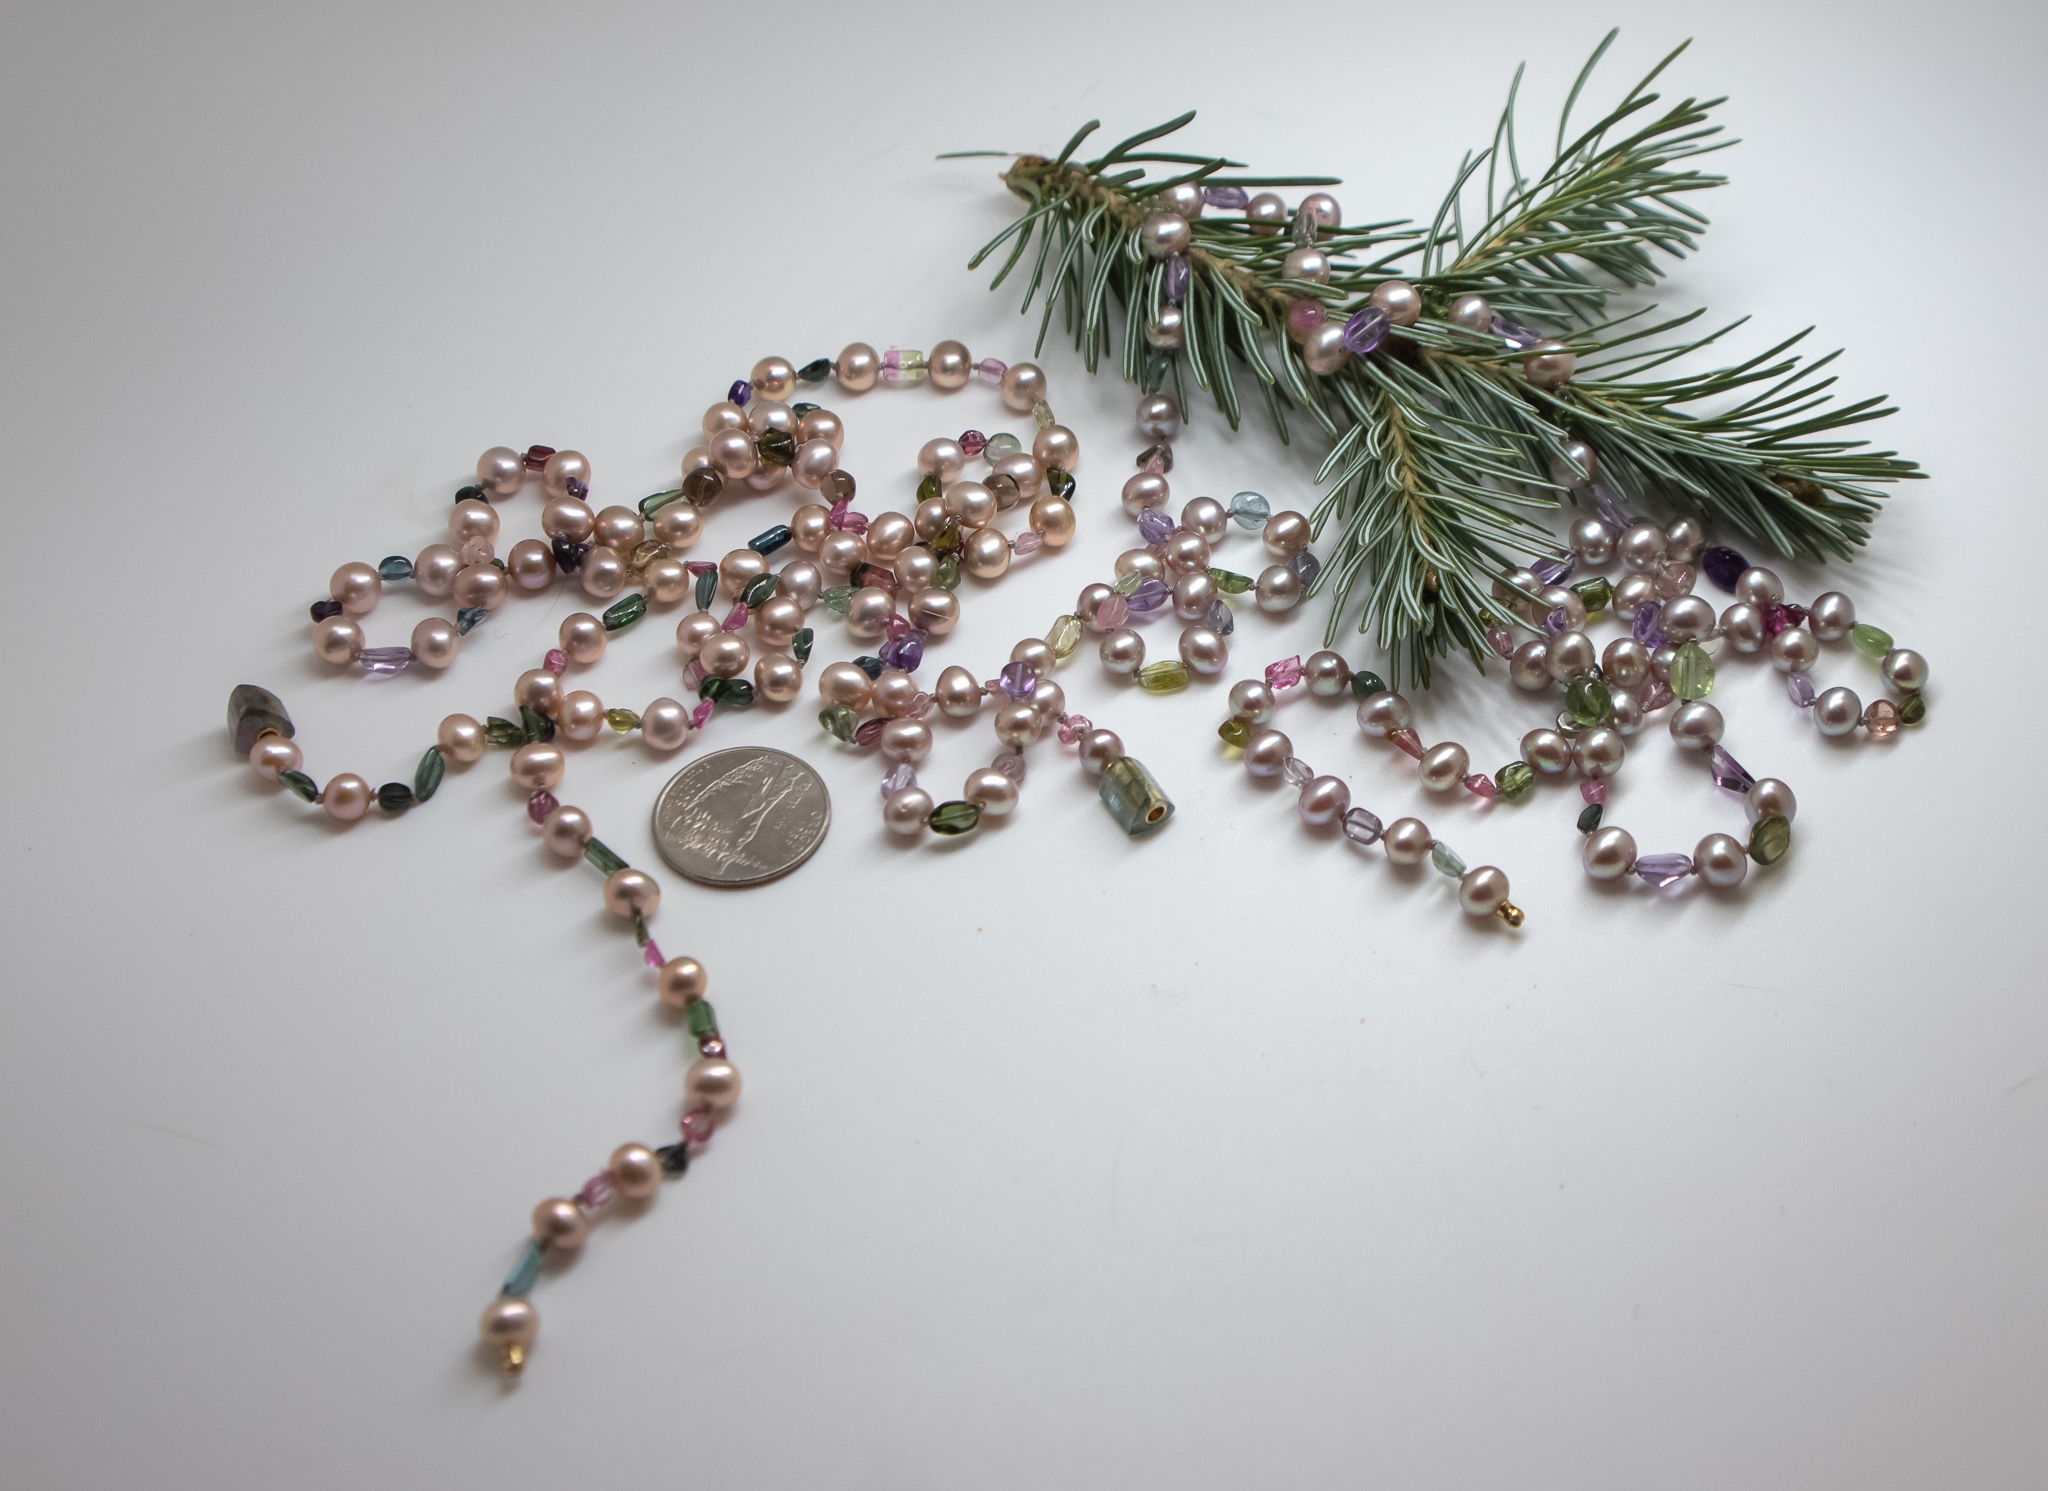 Tourmaline and Freshwater pearl necklace photographed with a Spruce sprig and US Quarter coin for scale